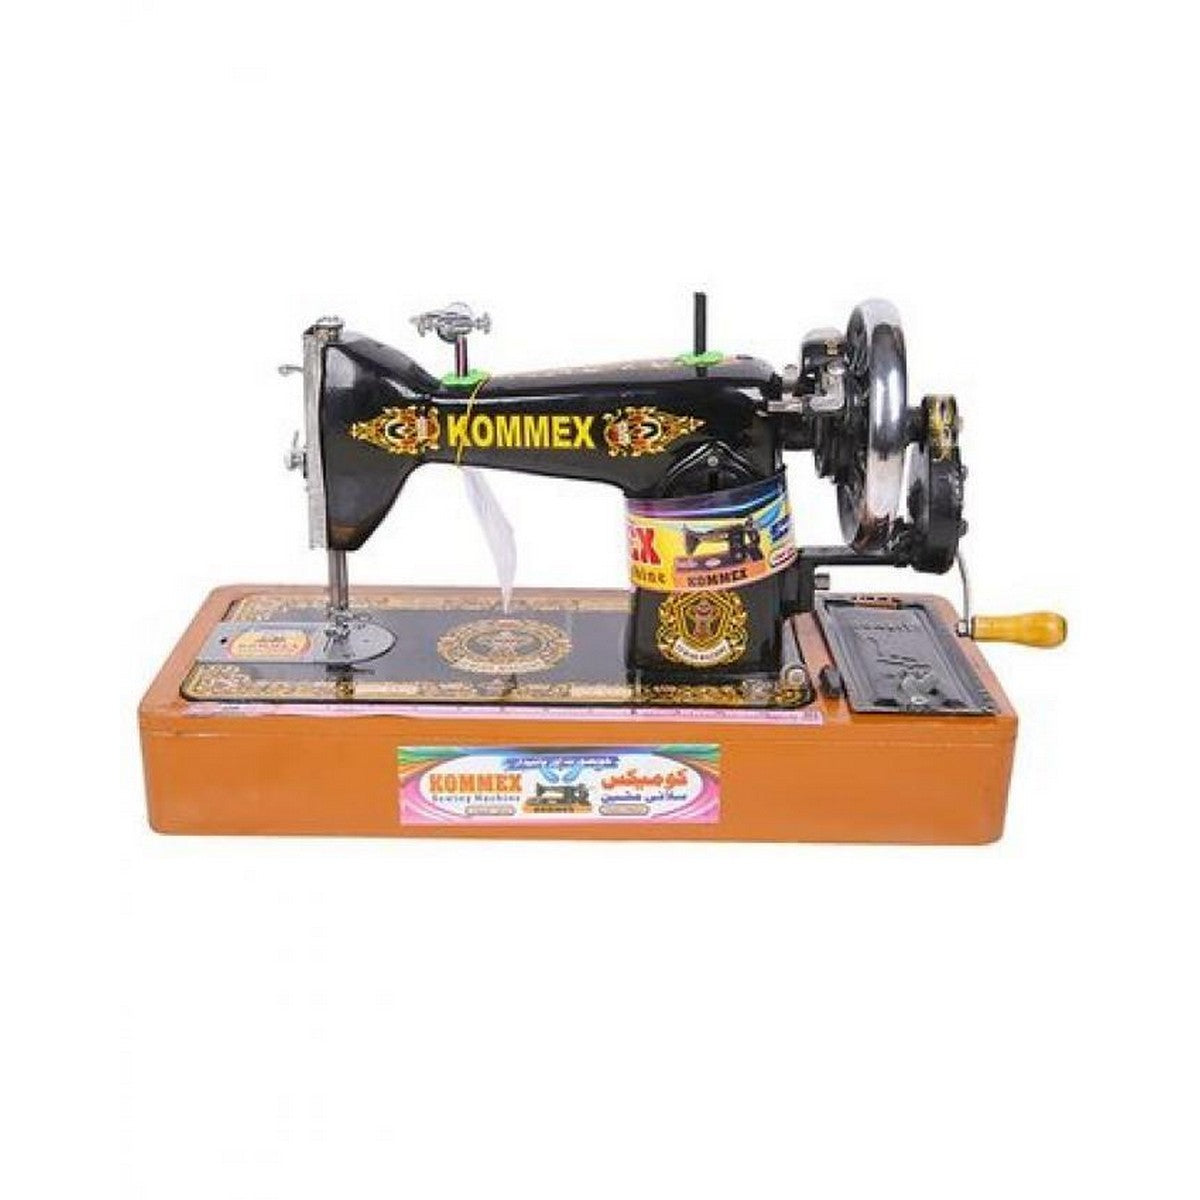 Kommex Sewing Manual Machine Easy to use and light weight 1 Year Brand Warranty